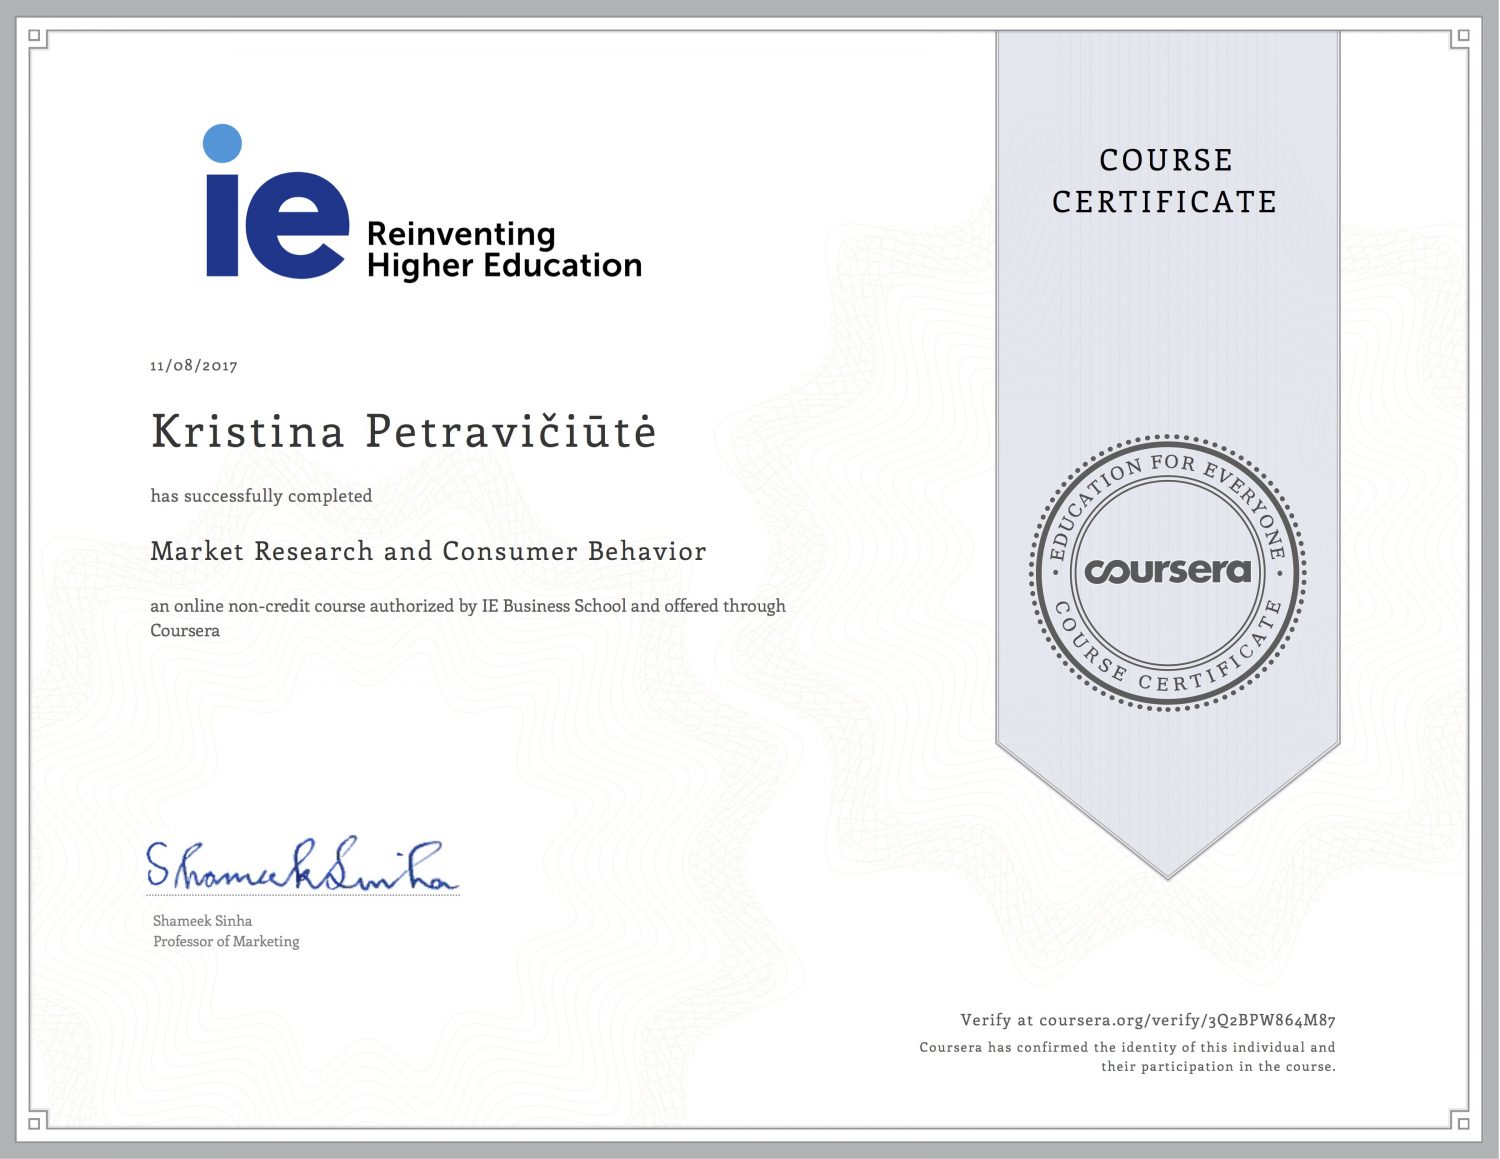 Market Research and Consumer Behavior - certificate